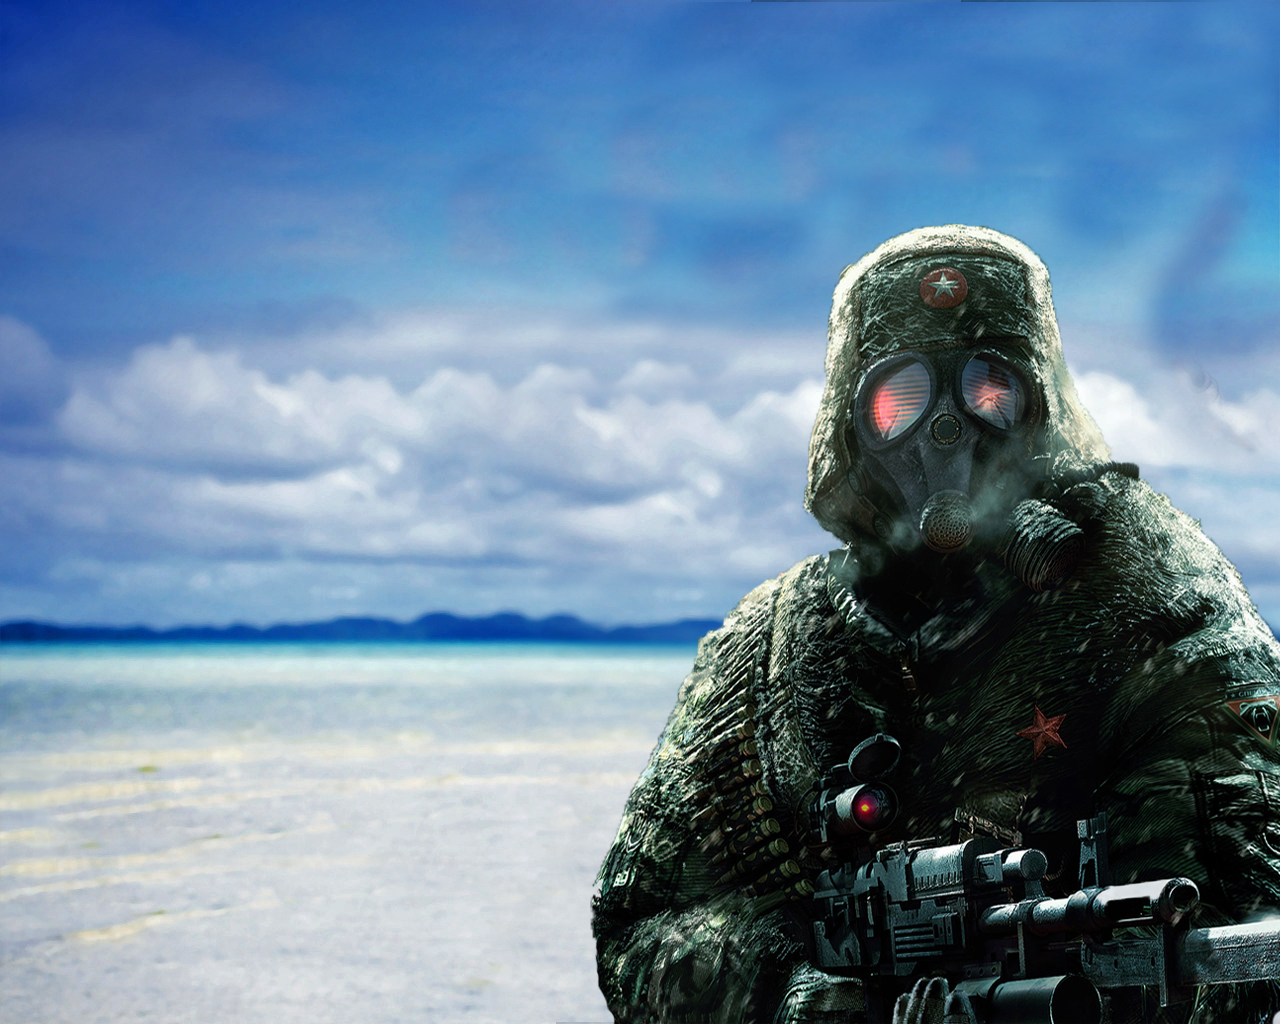 russian army wallpaper,personal protective equipment,arctic,sky,headgear,photography